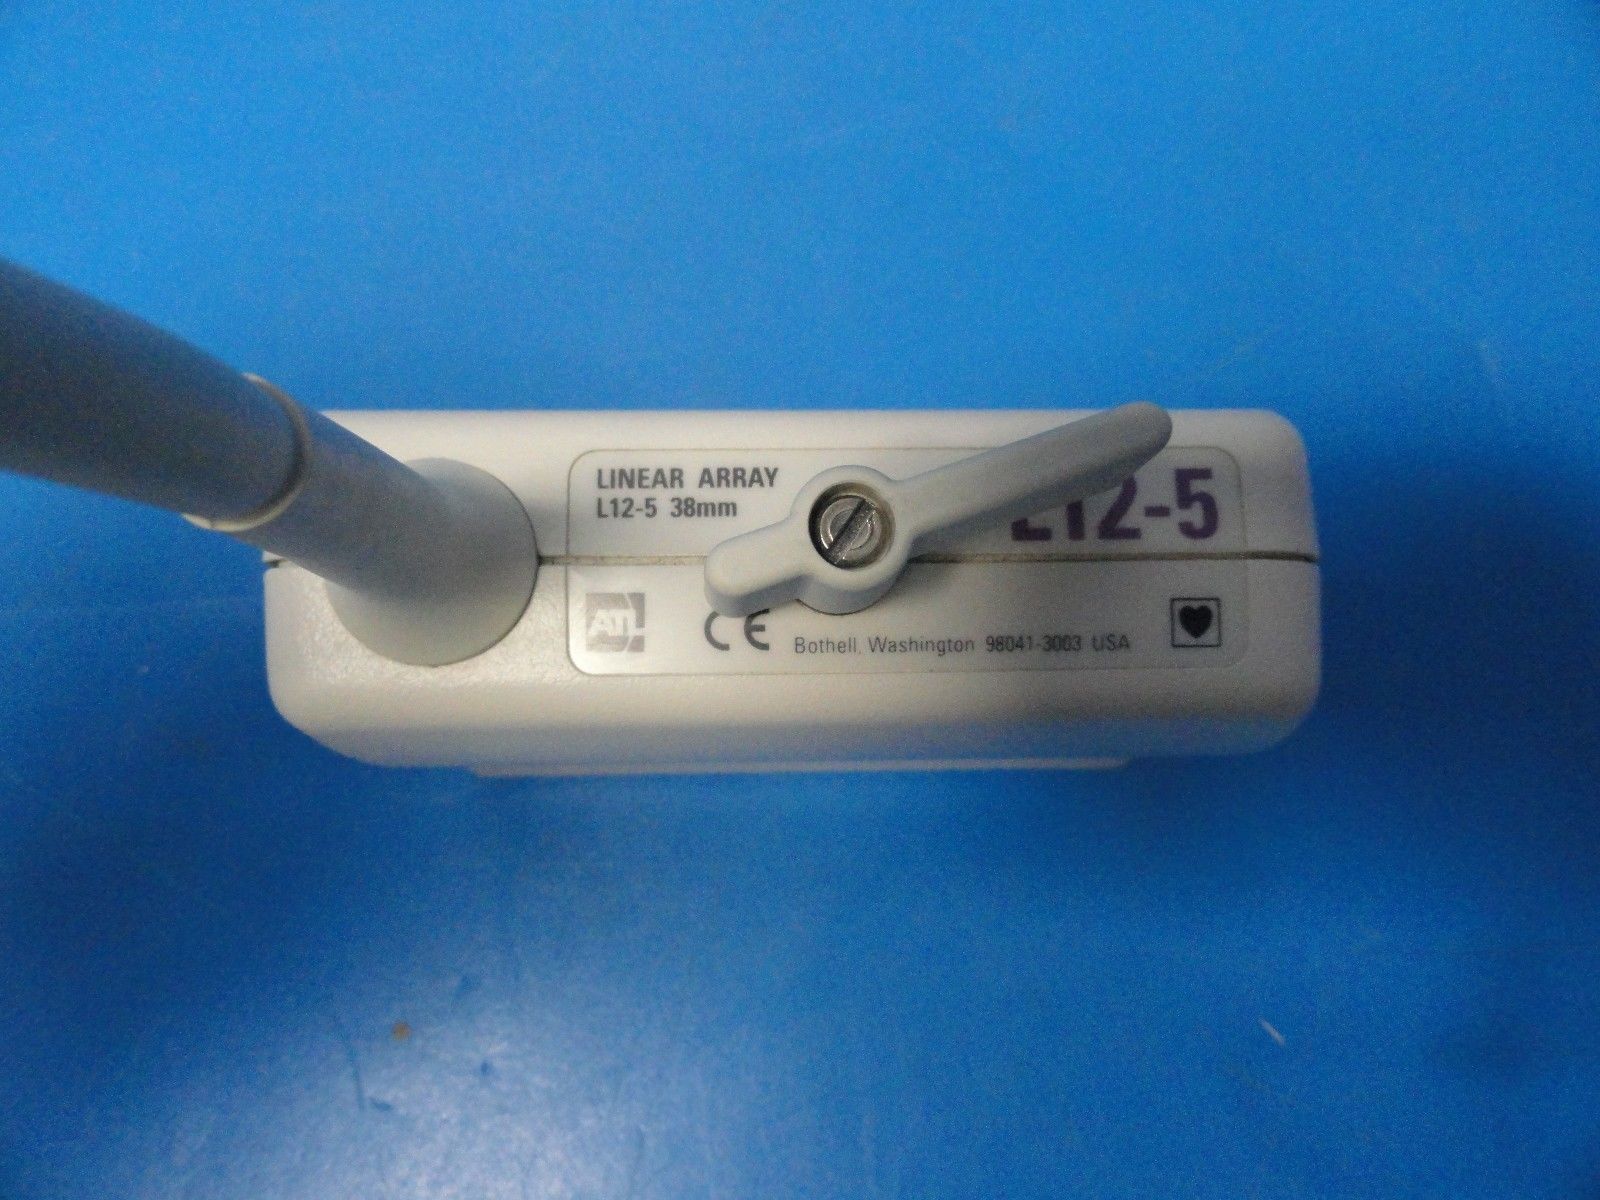 2005 ATL L12-5 38MM Linear Array Probe for Vascular Small Parts Pediatric (6864) DIAGNOSTIC ULTRASOUND MACHINES FOR SALE